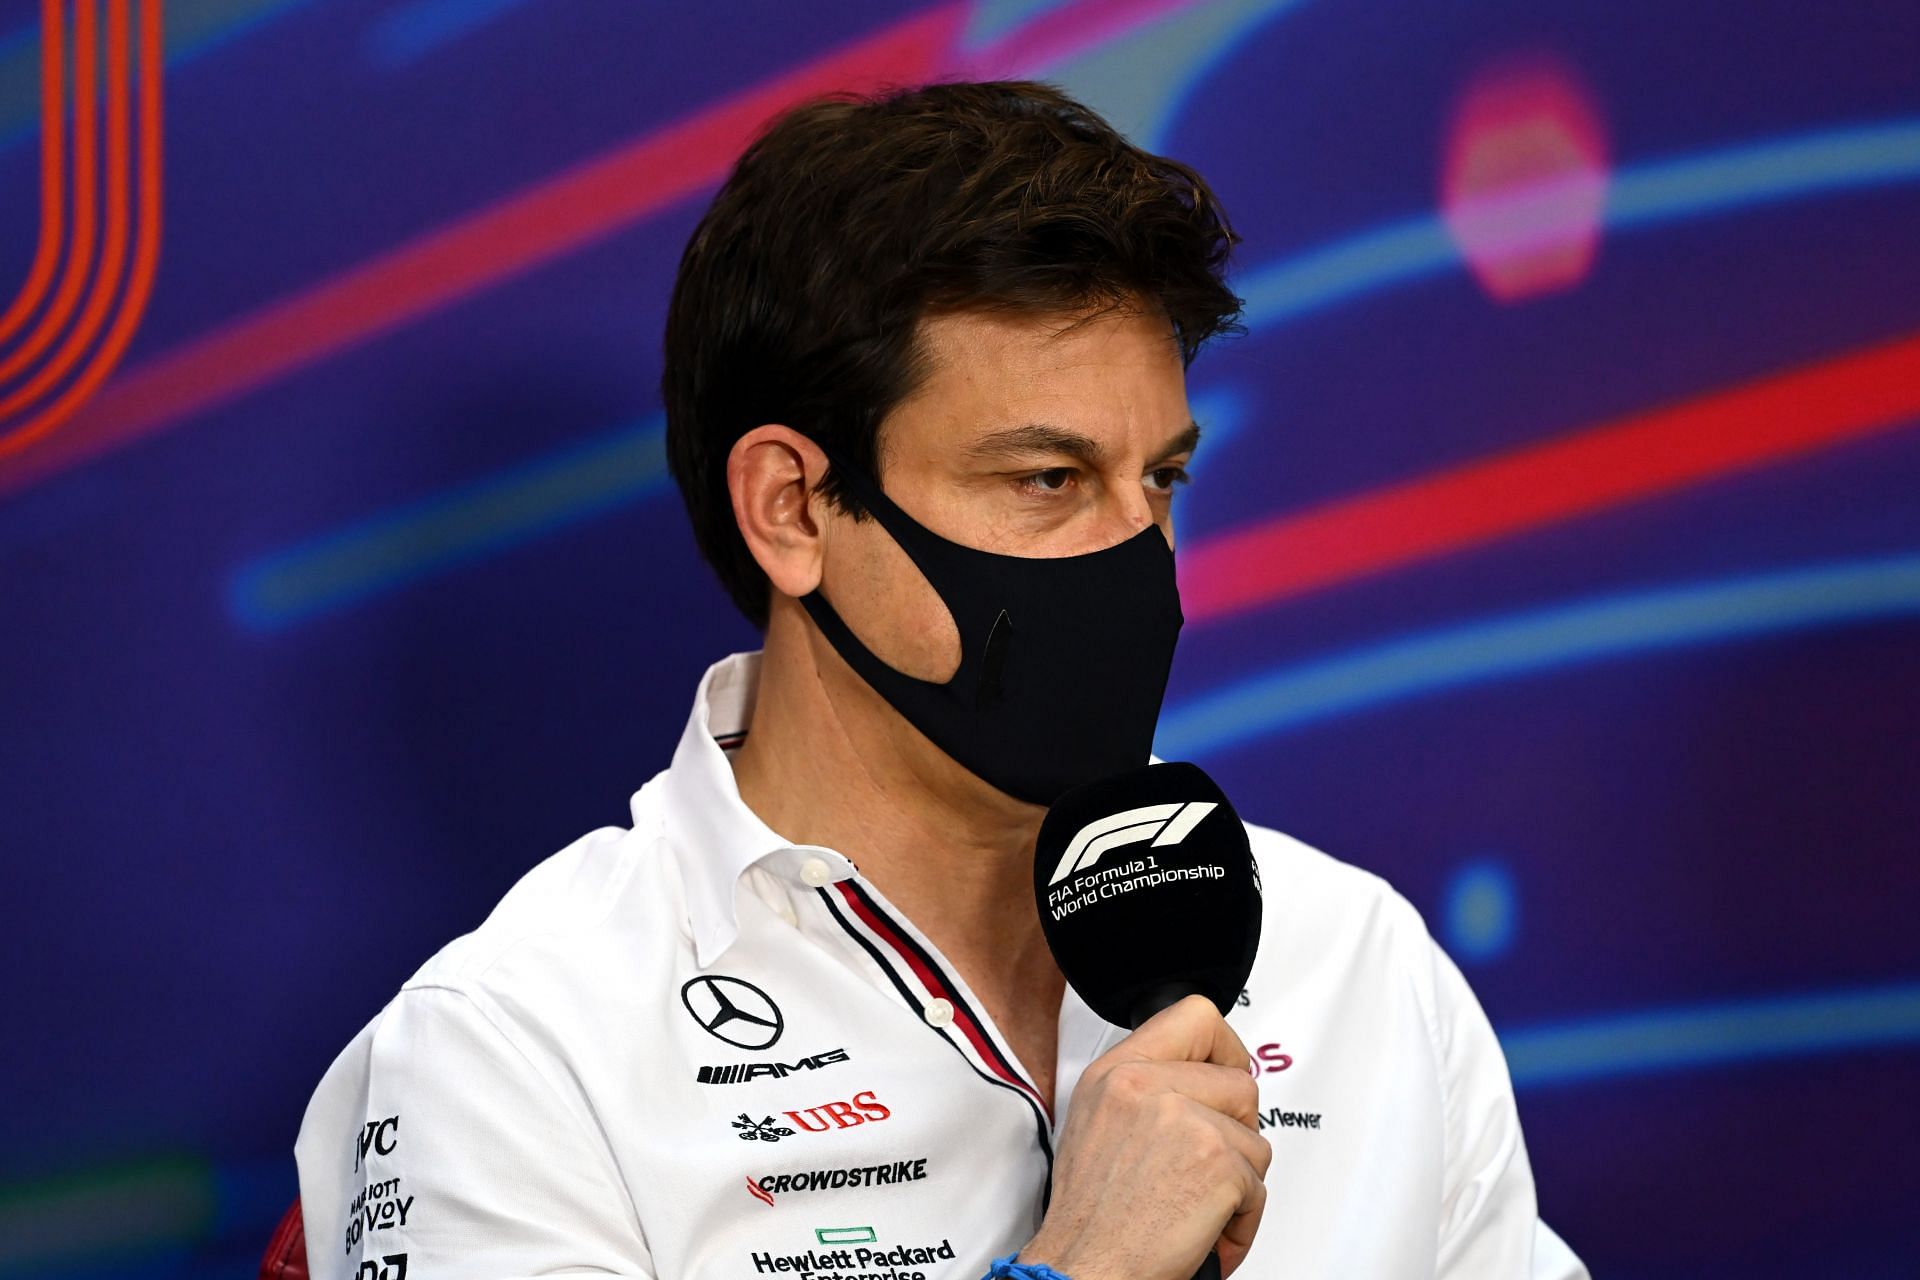 Mercedes boss Toto Wolff speaks to the media before the 2022 F1 Bahrain GP (Photo by Clive Mason/Getty Images)